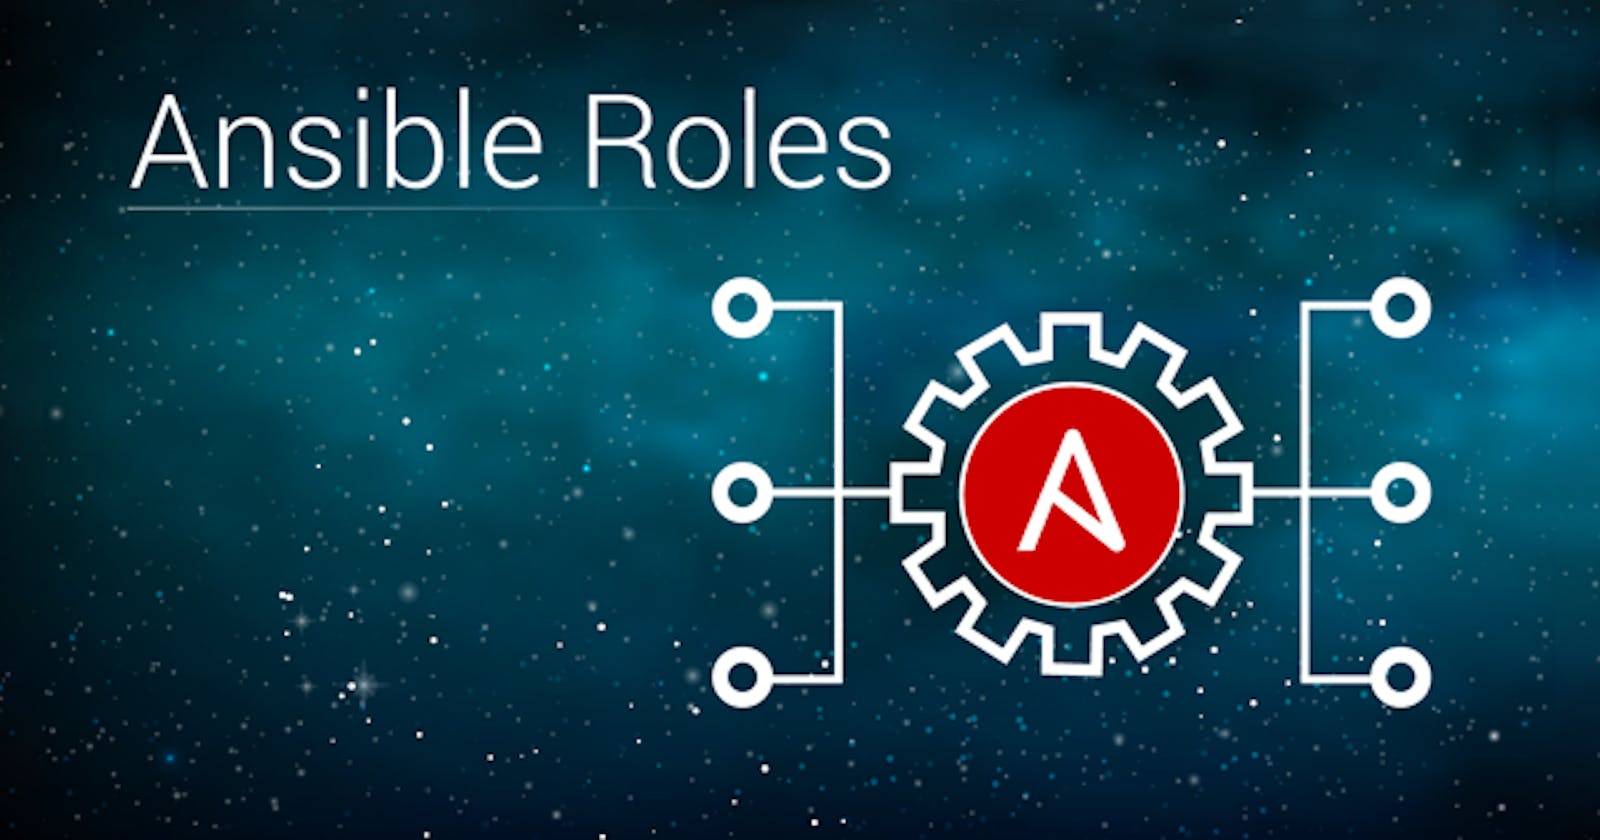 Ansible Code Management using Roles